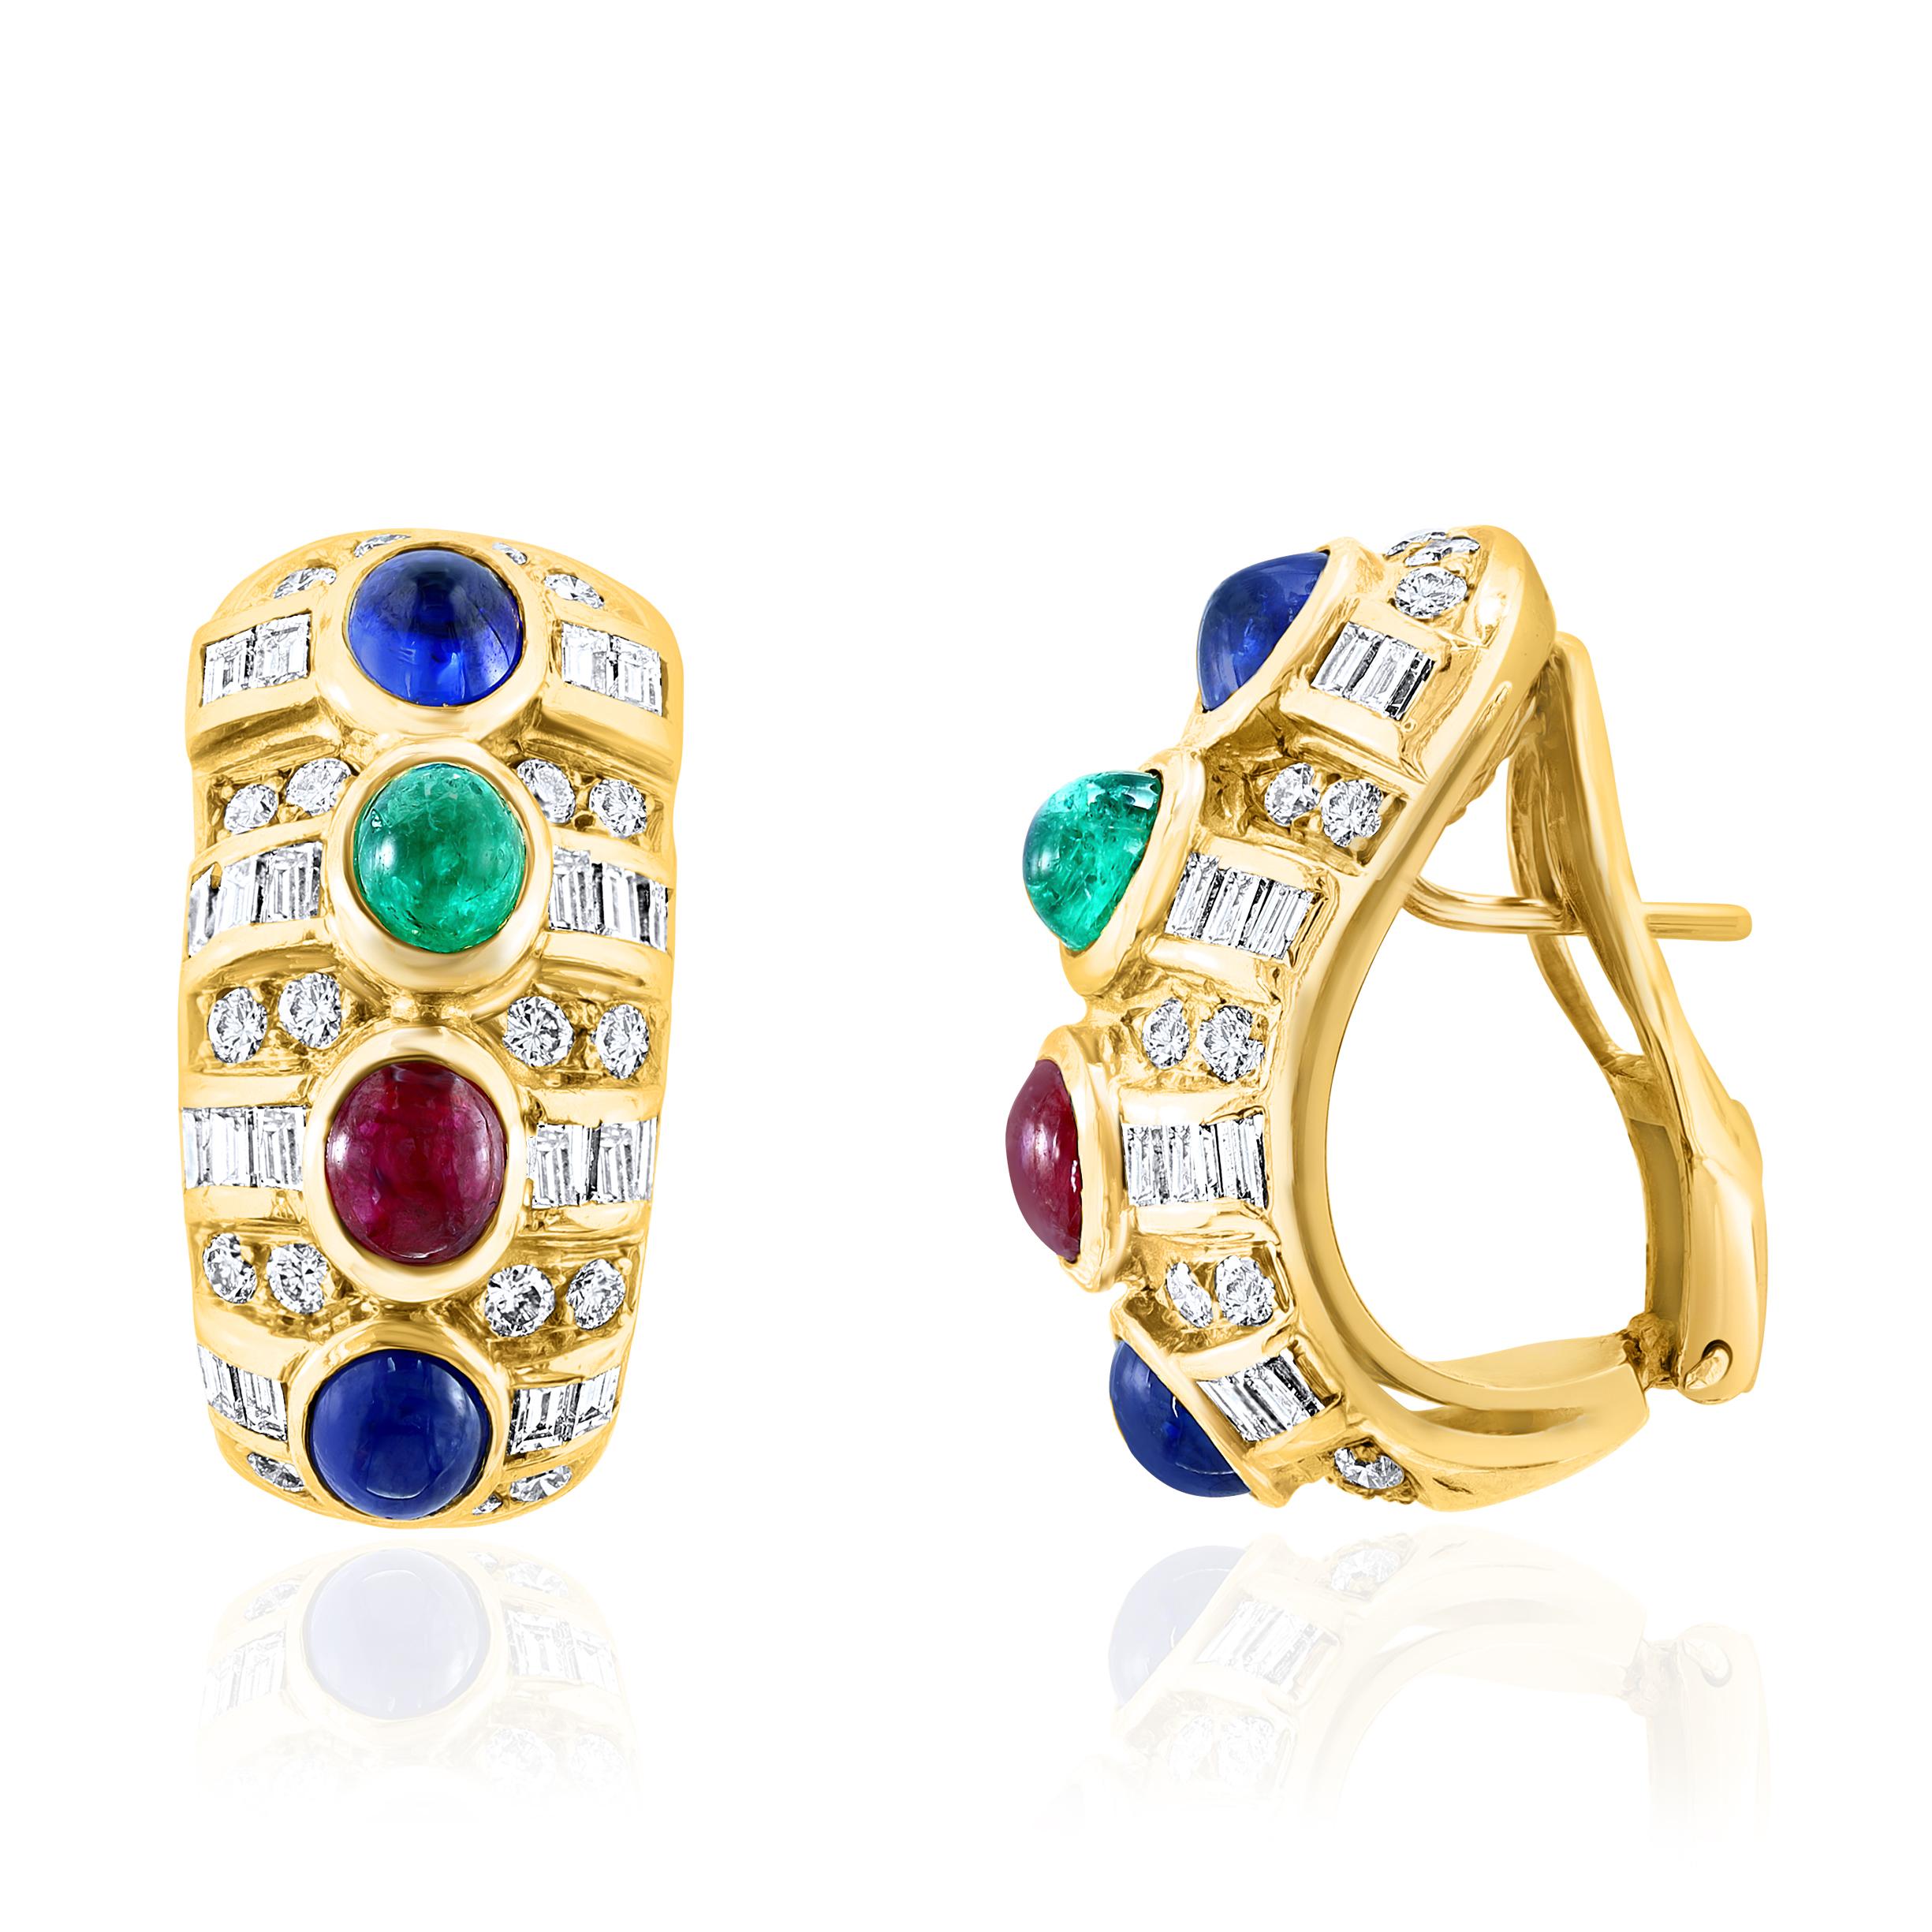 Emerald, Ruby and Sapphire Cabochons with Baguette and Round Diamonds.

Total weight approximately 4 Carats.

18 Karat Yellow Gold.